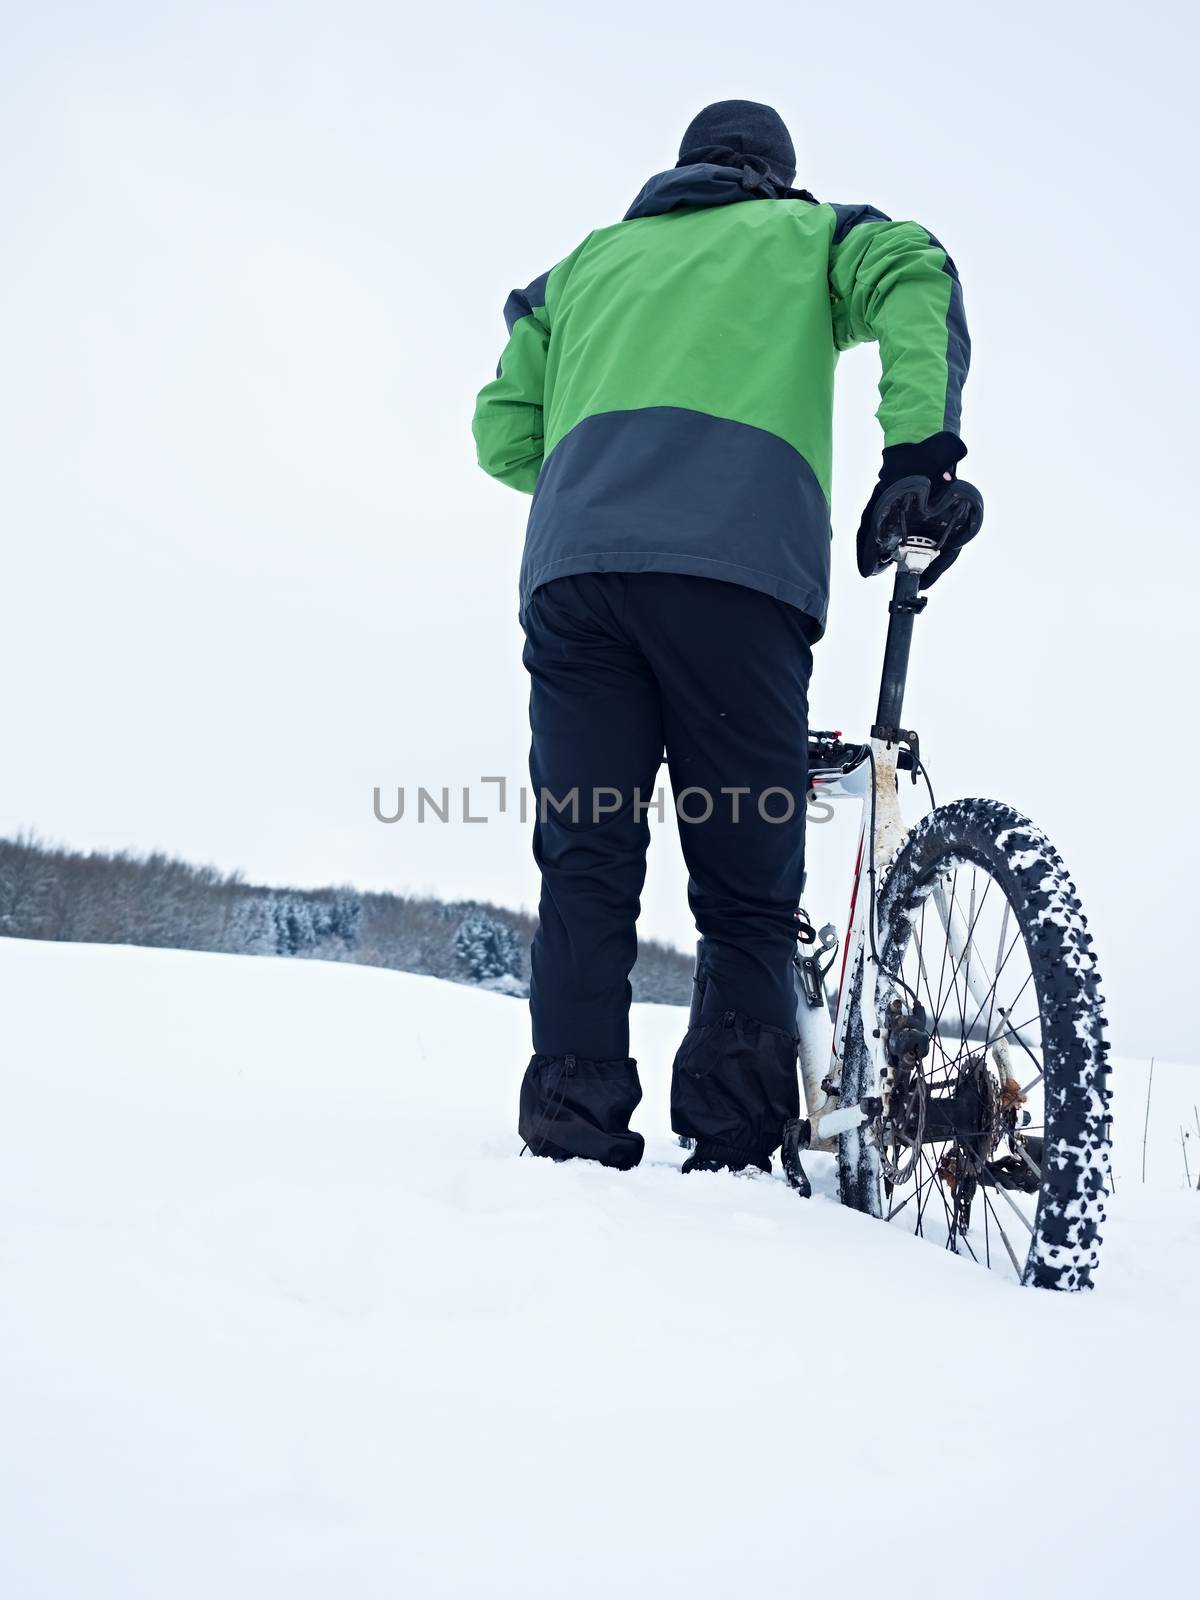 Man with mountain bike stay in powder snow. Lost path  in deep snowdrift. Rear wheel detail. Snow flakes melting on dark off road tyre.  Winter weather in the field.